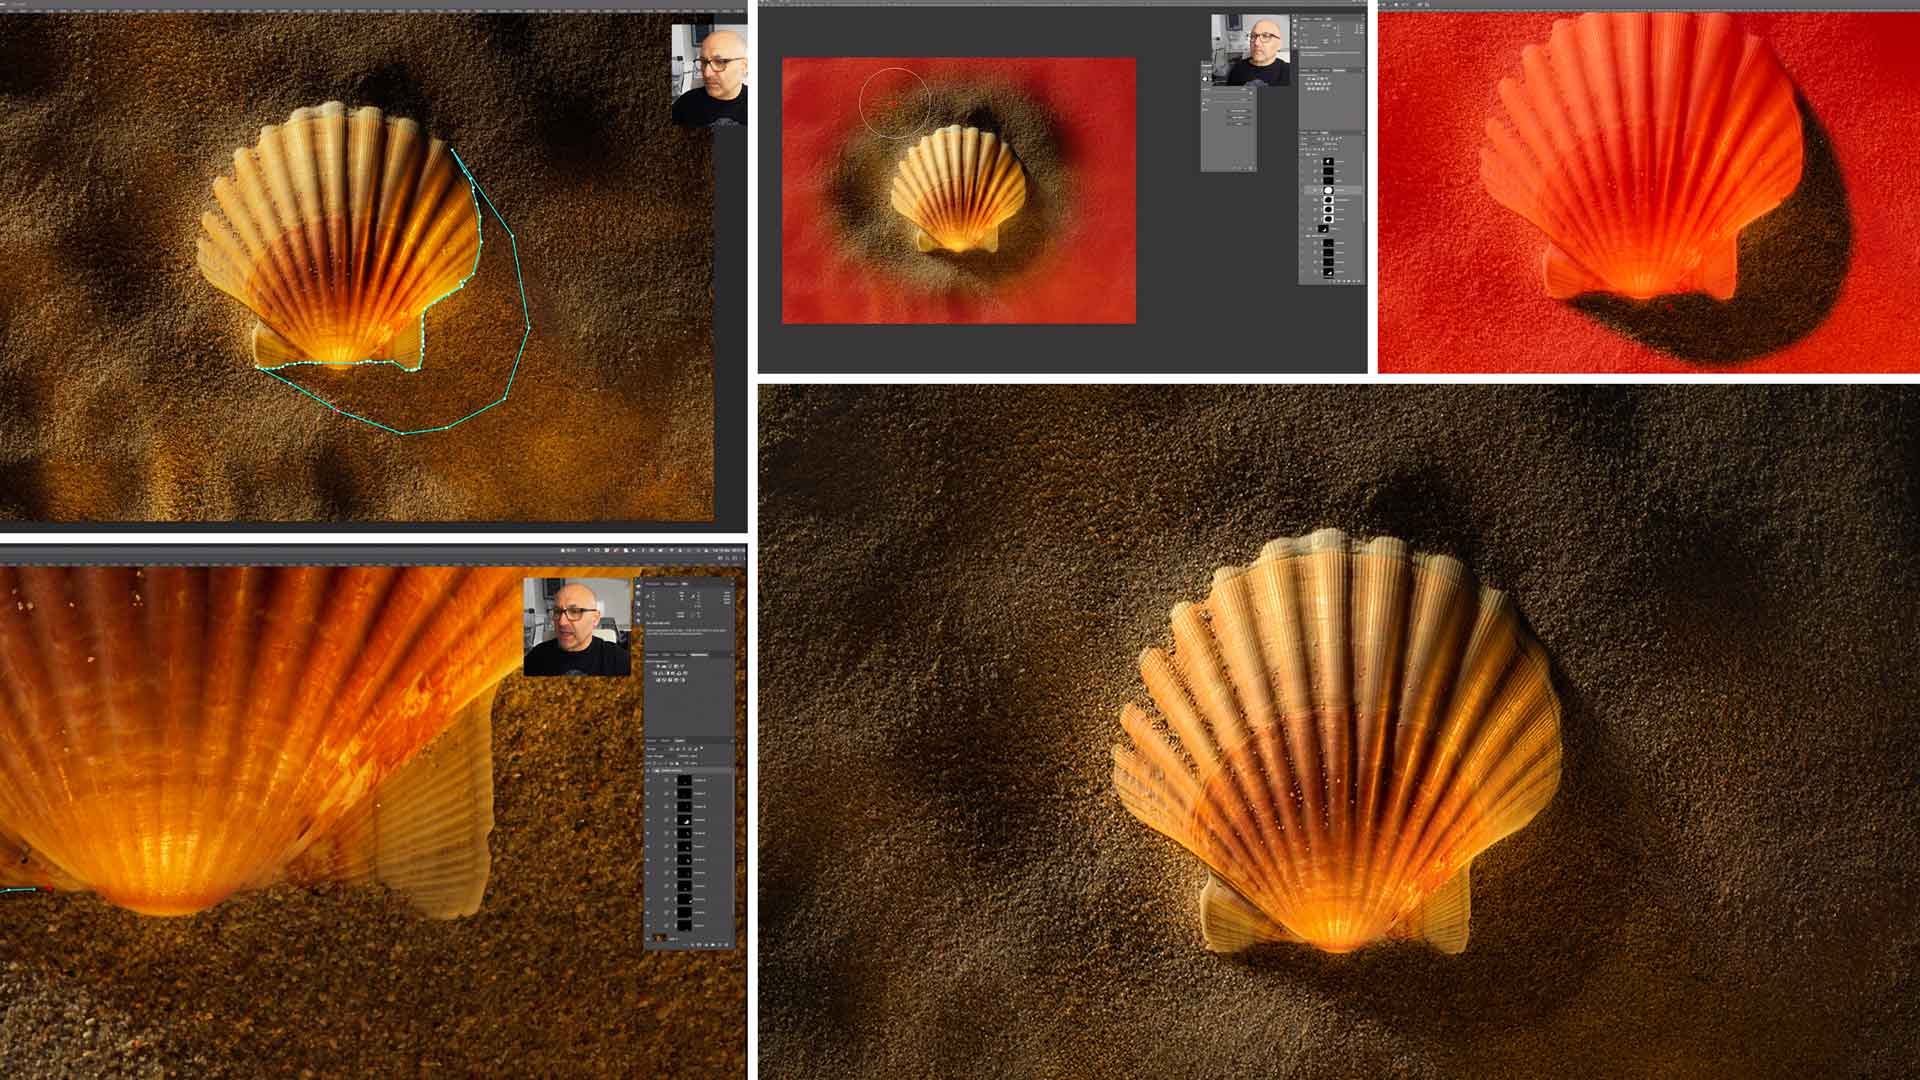 Wall Art Shells: Imitating Golden Hour in the Studio | Post-Production